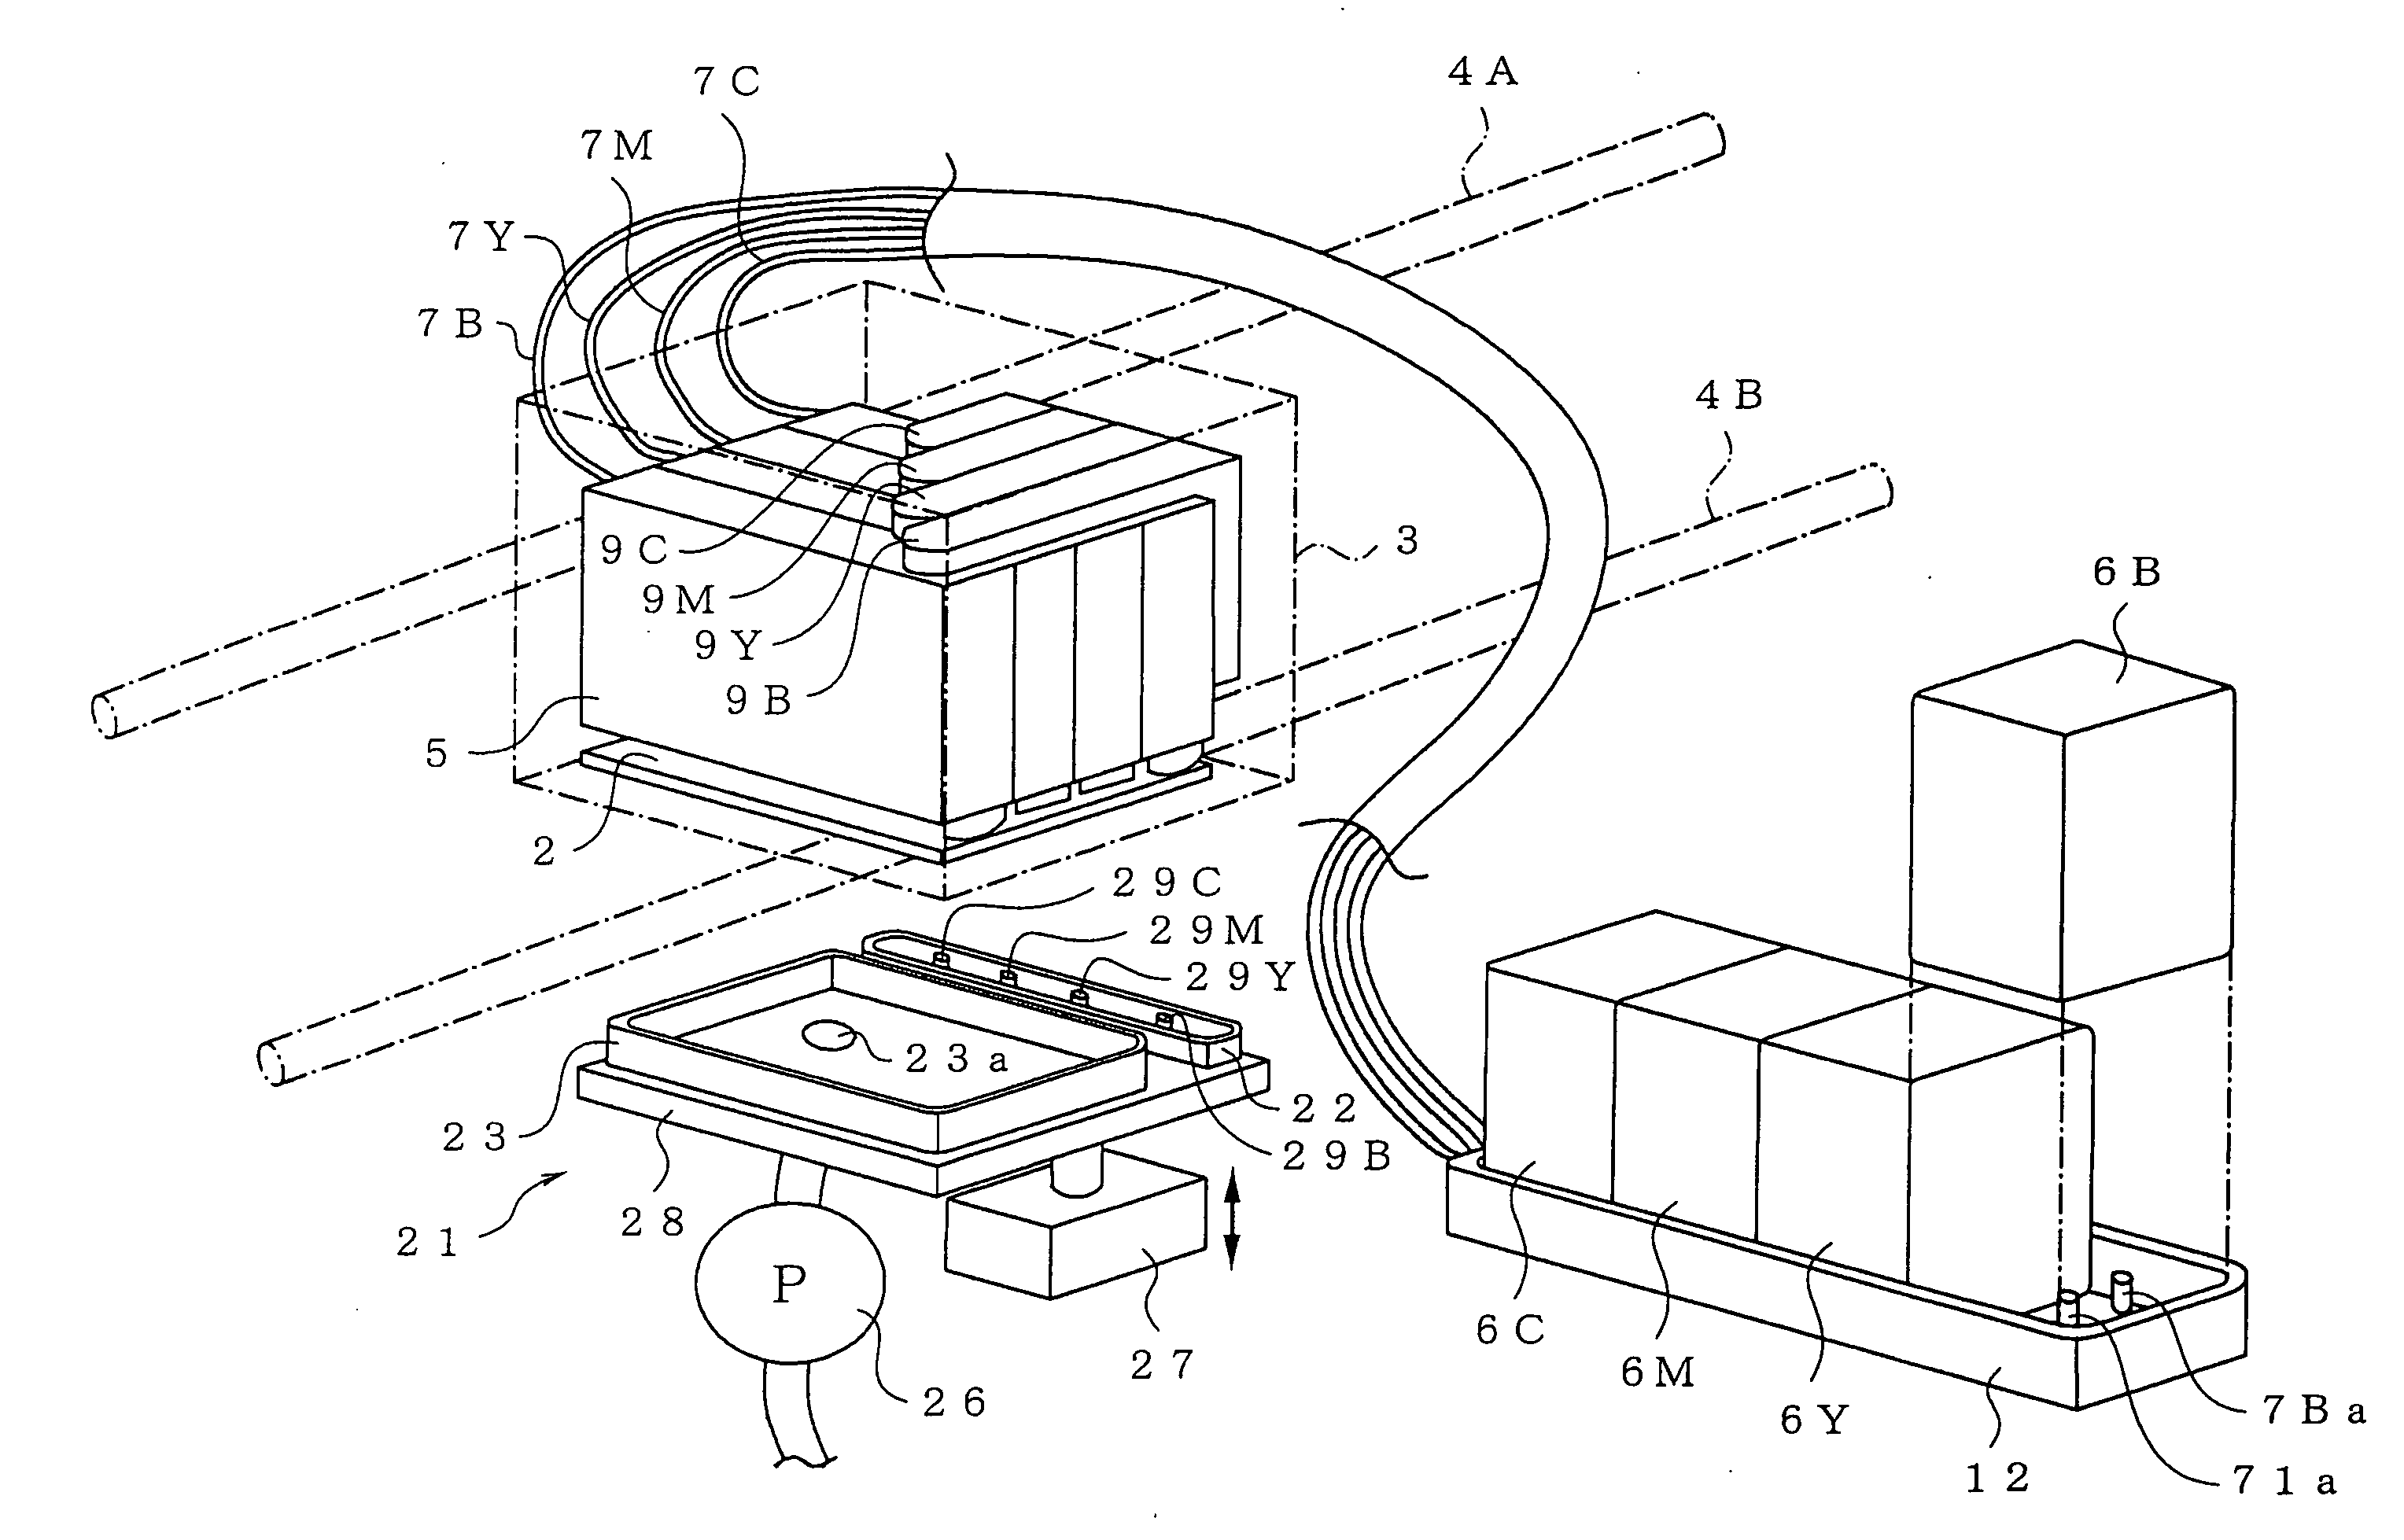 Inkjet recording apparatus and air removal method therefor